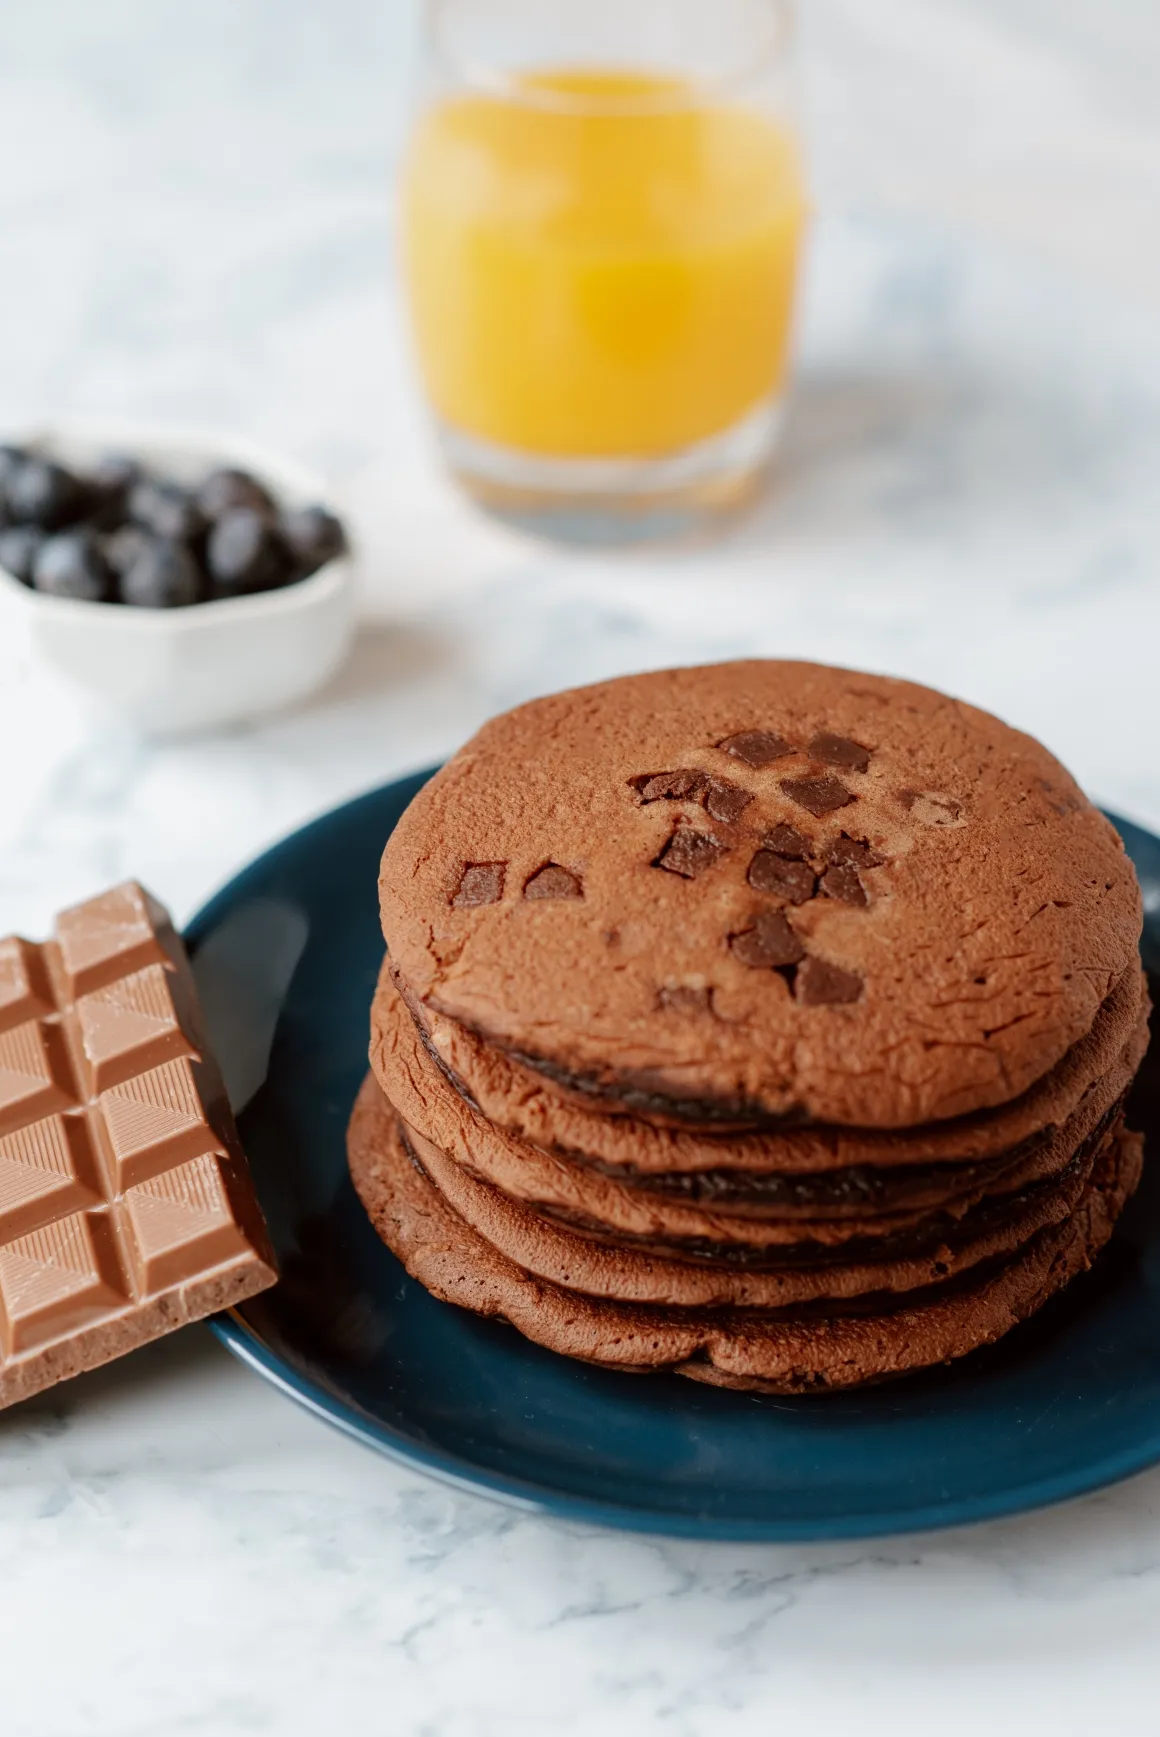 Pile of brown pancakes on a plate next to a chocolate bar